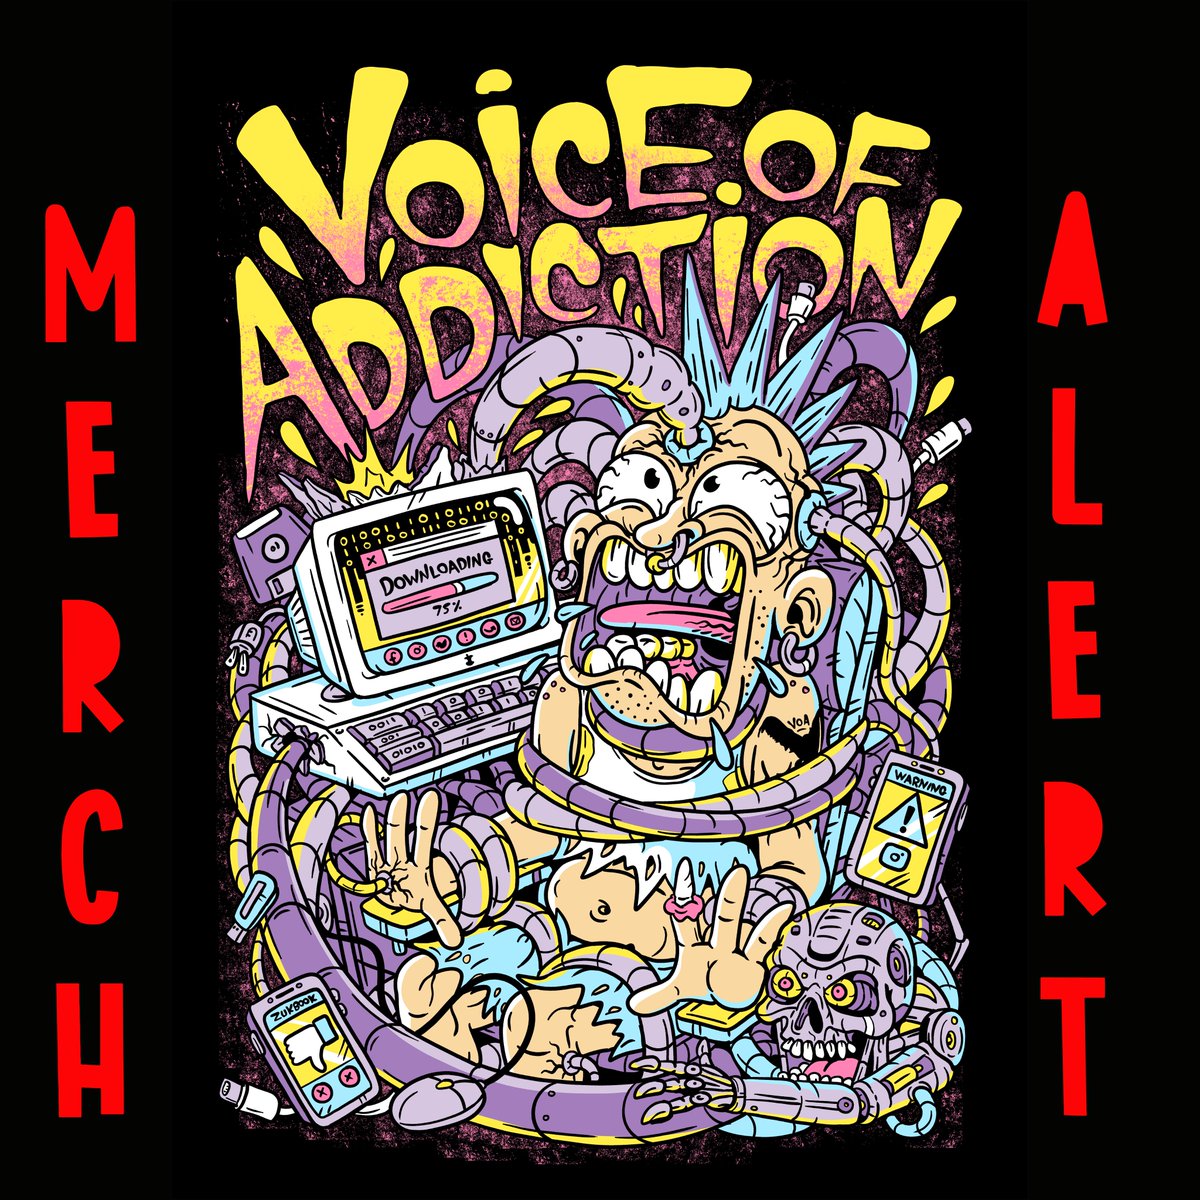 LAST CALL to get your merch orders in by the end of Tuesday night if you want them shipped before we leave on tour. VoiceOfAddiction.com/store